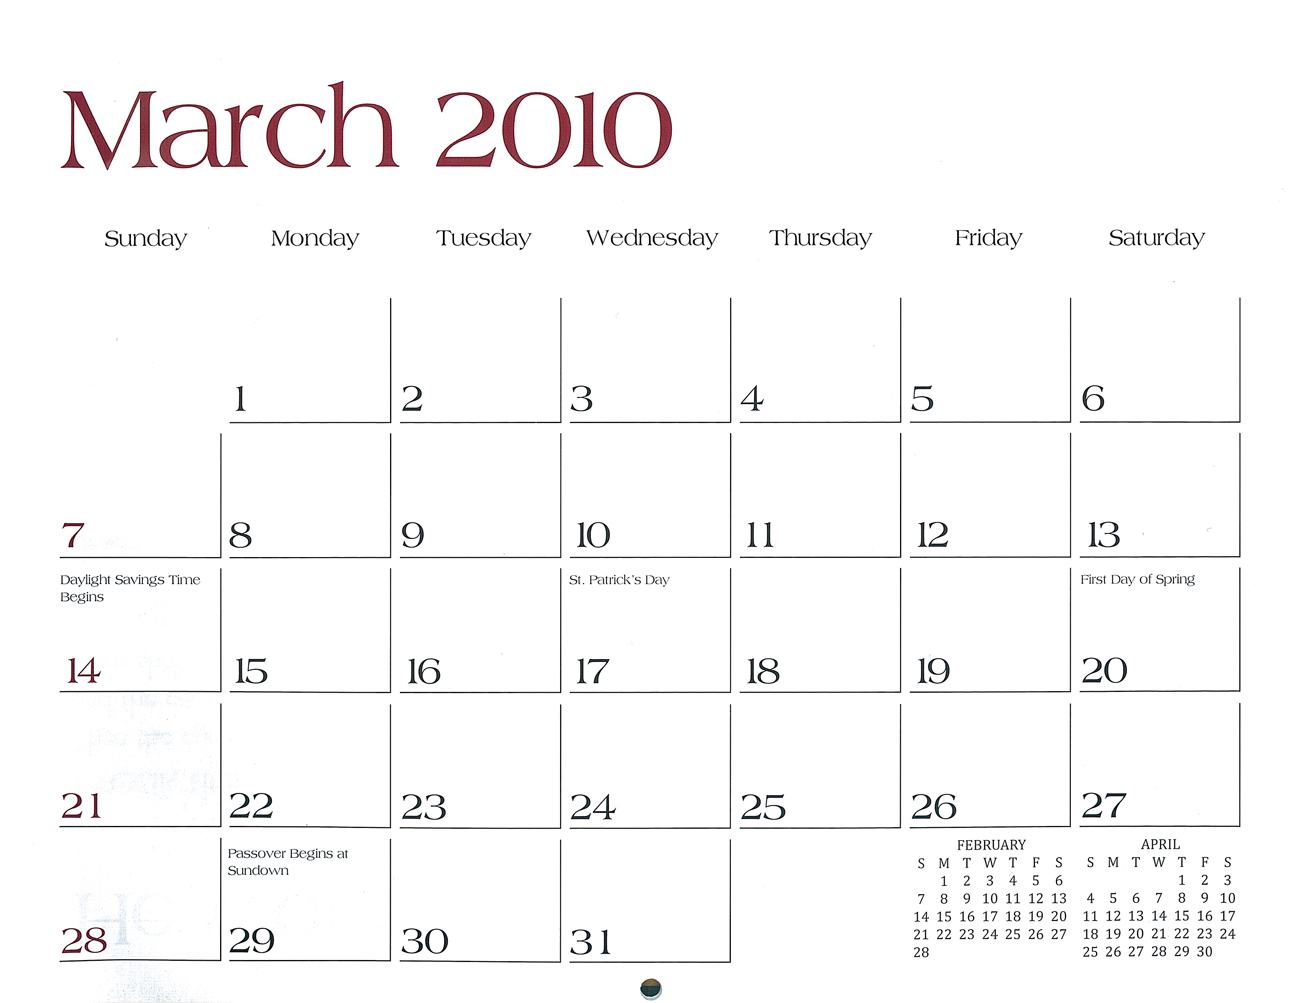 2010 Prophecy Calendar: March - He would be born in Bethlehem